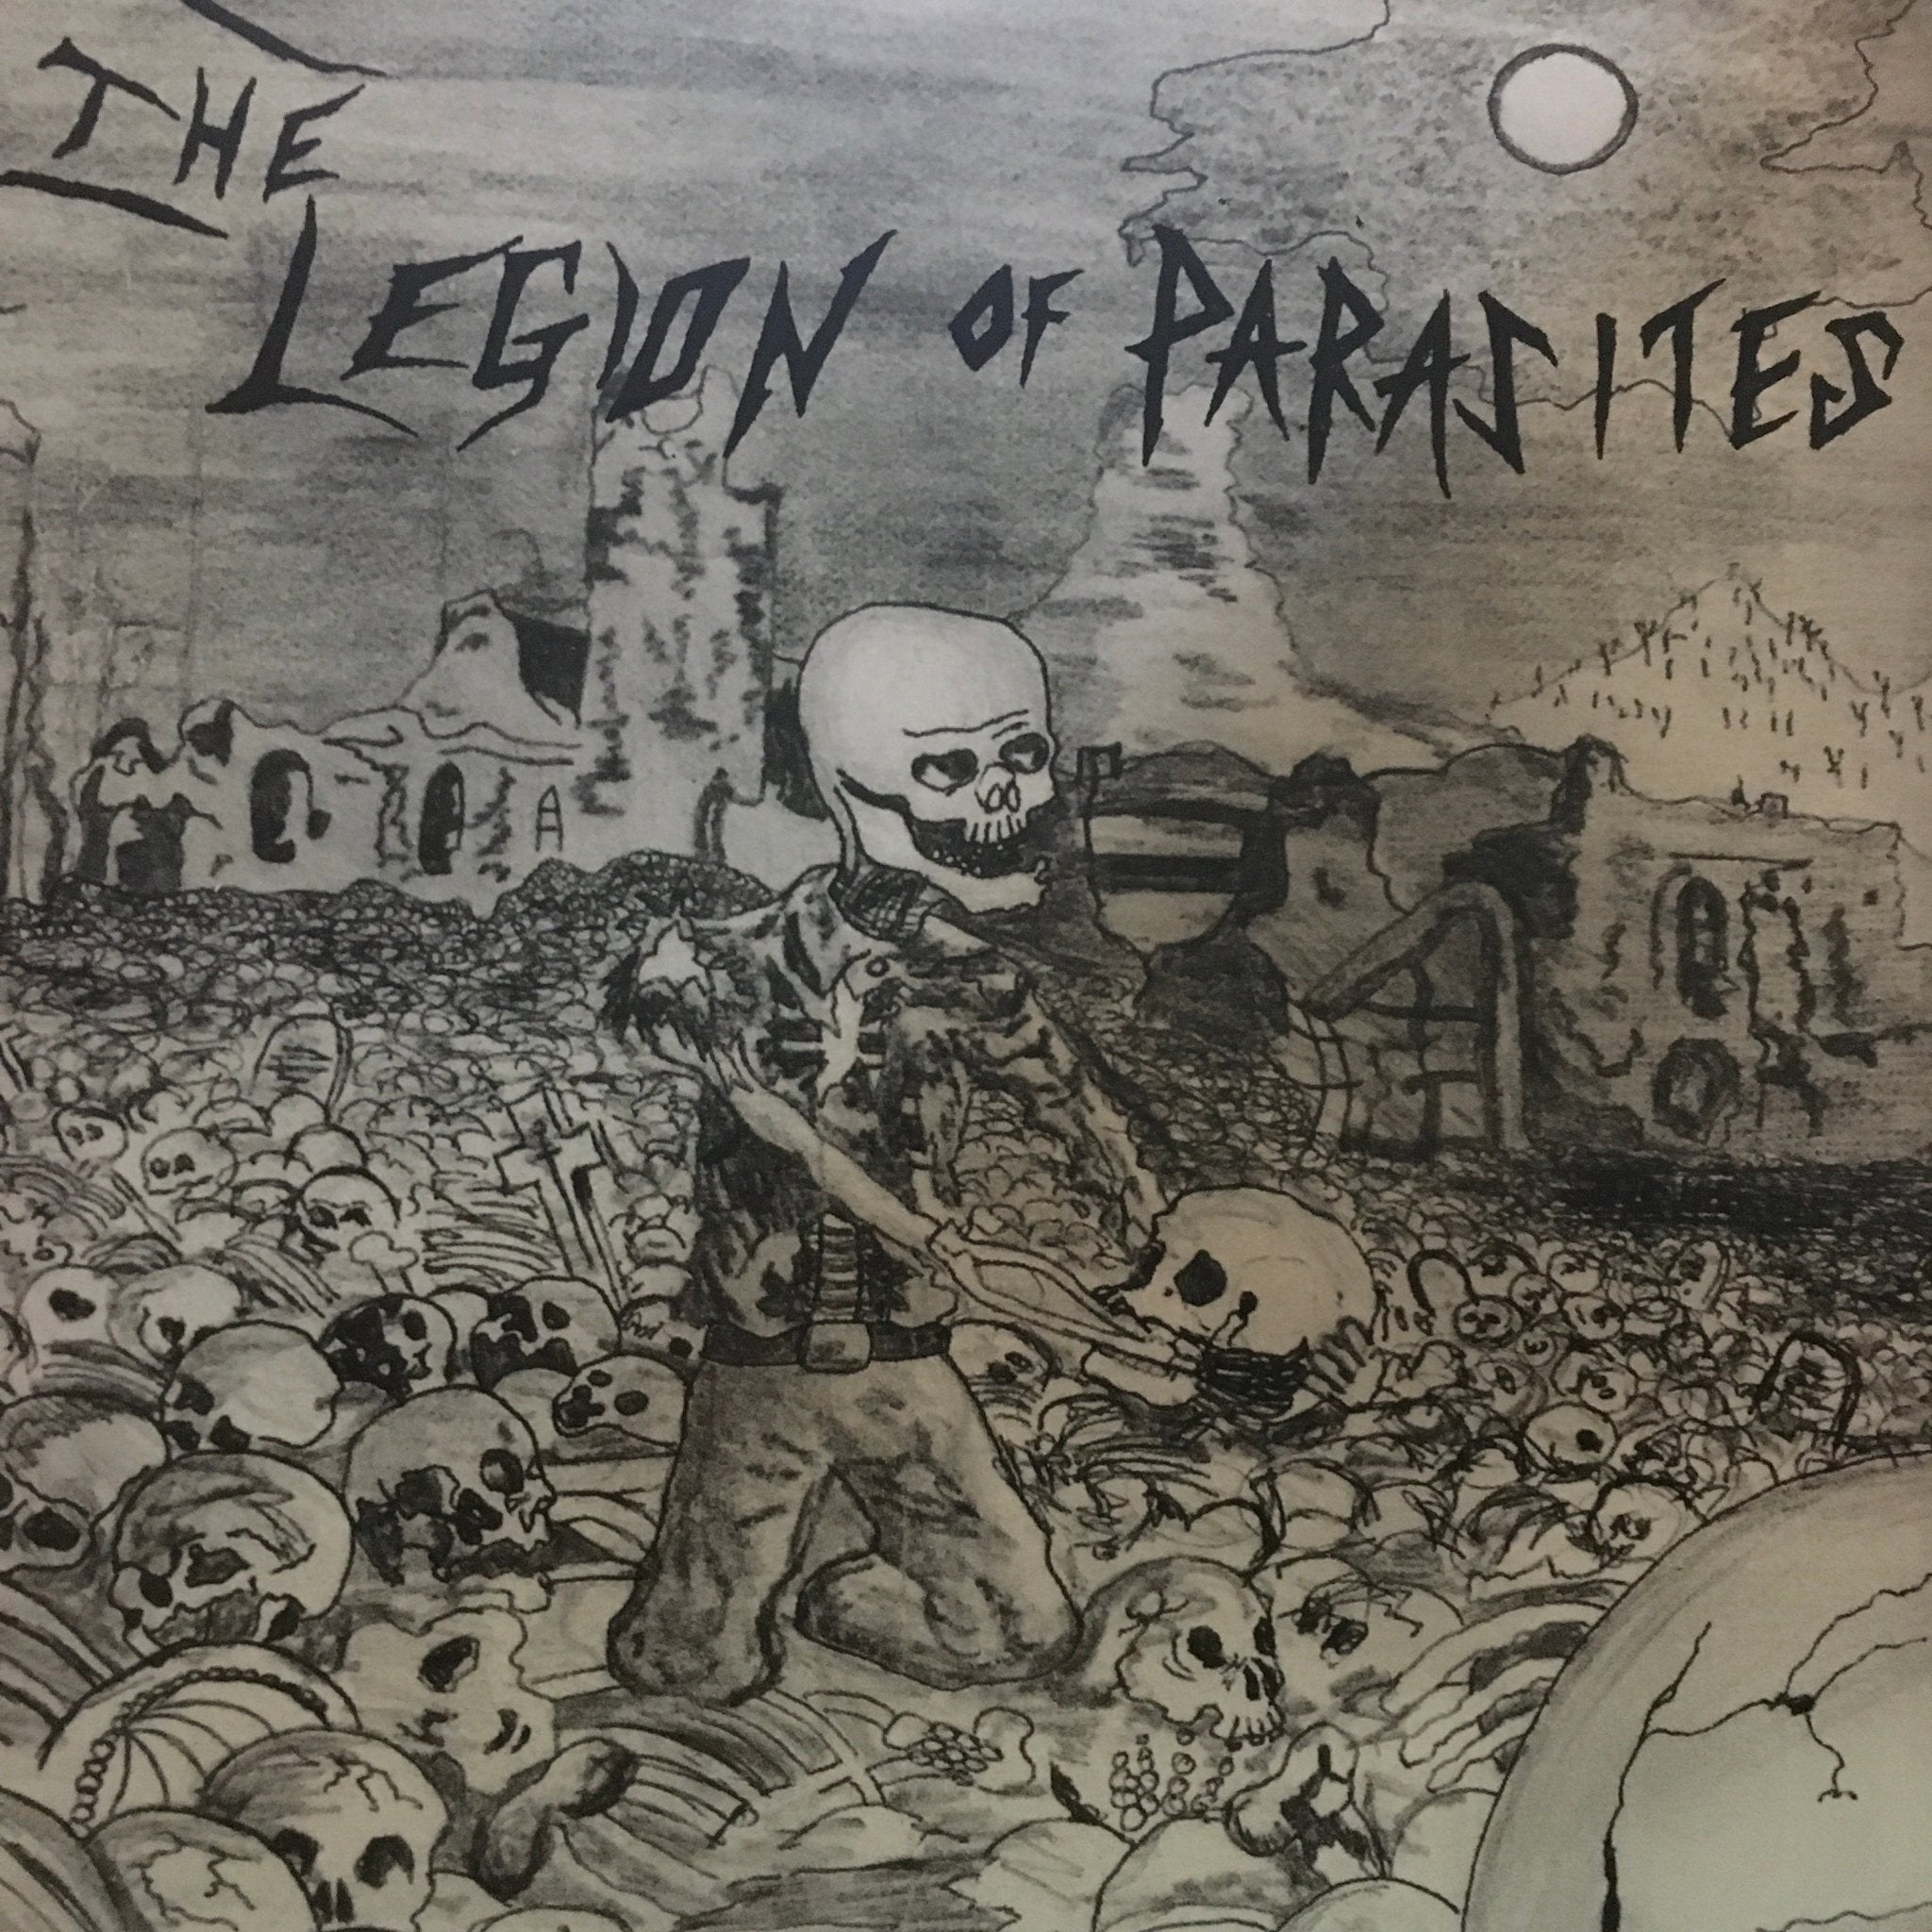 Legion Of Parasites - s/t LP - Vinyl - Another Disaster Two